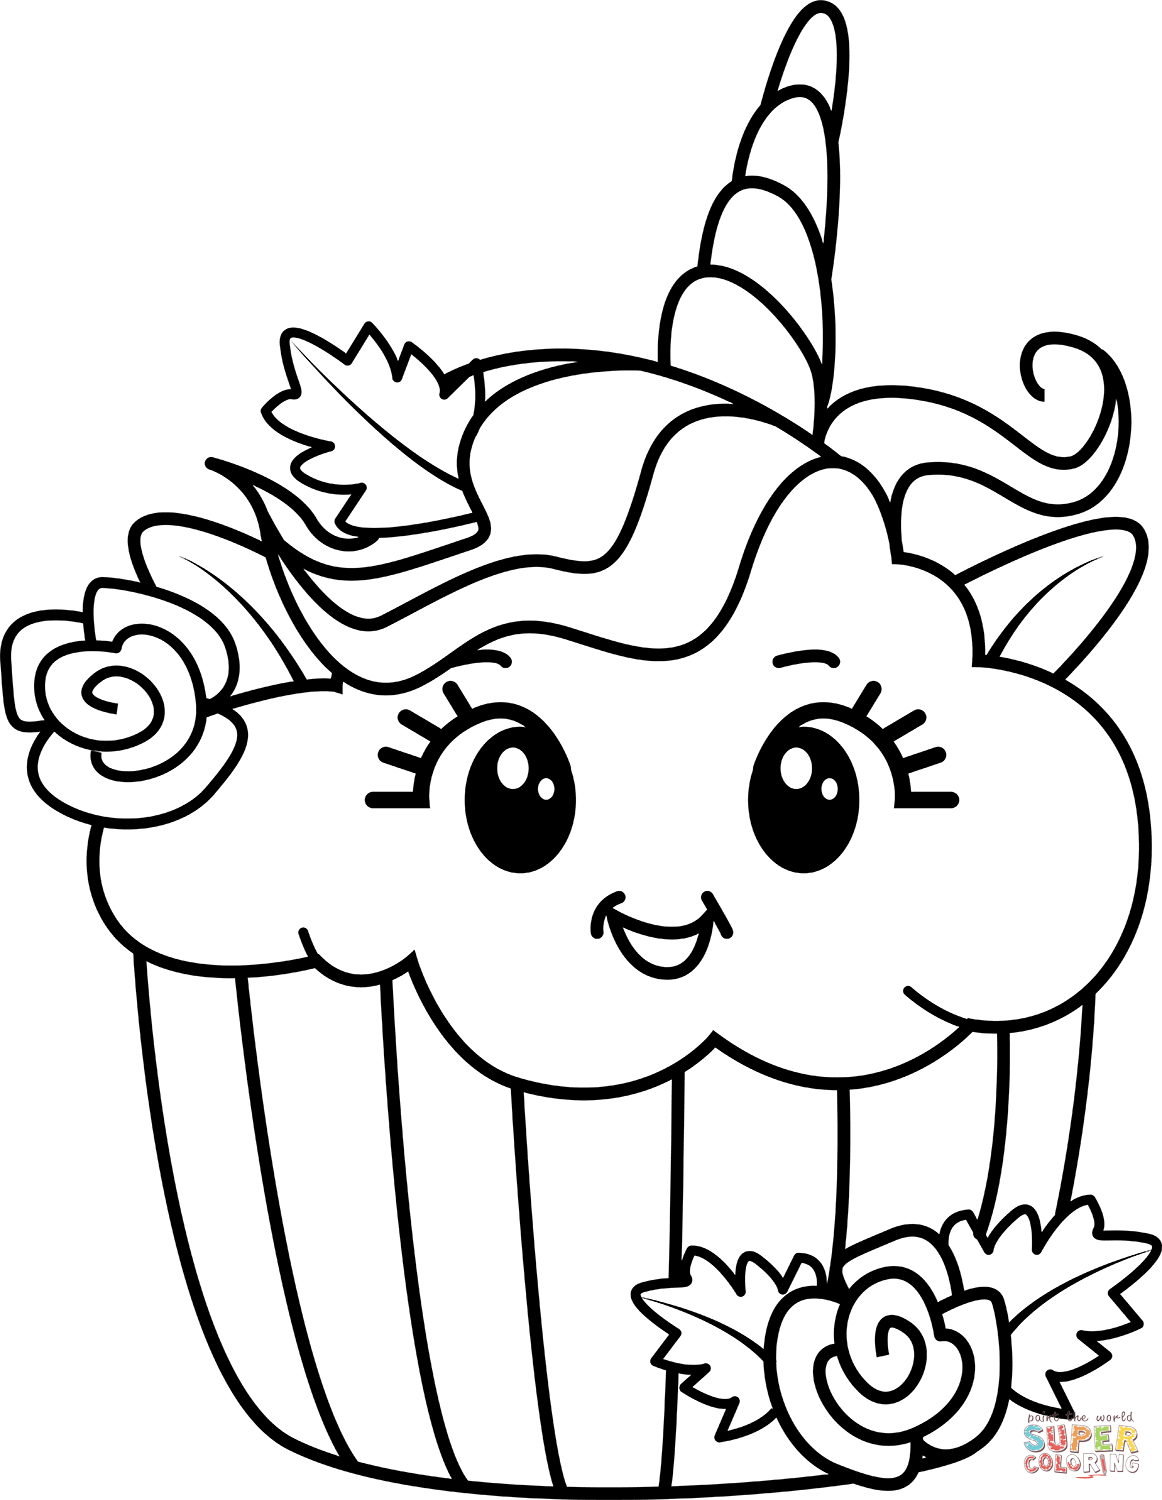 Unicorn cake coloring page free printable coloring pages